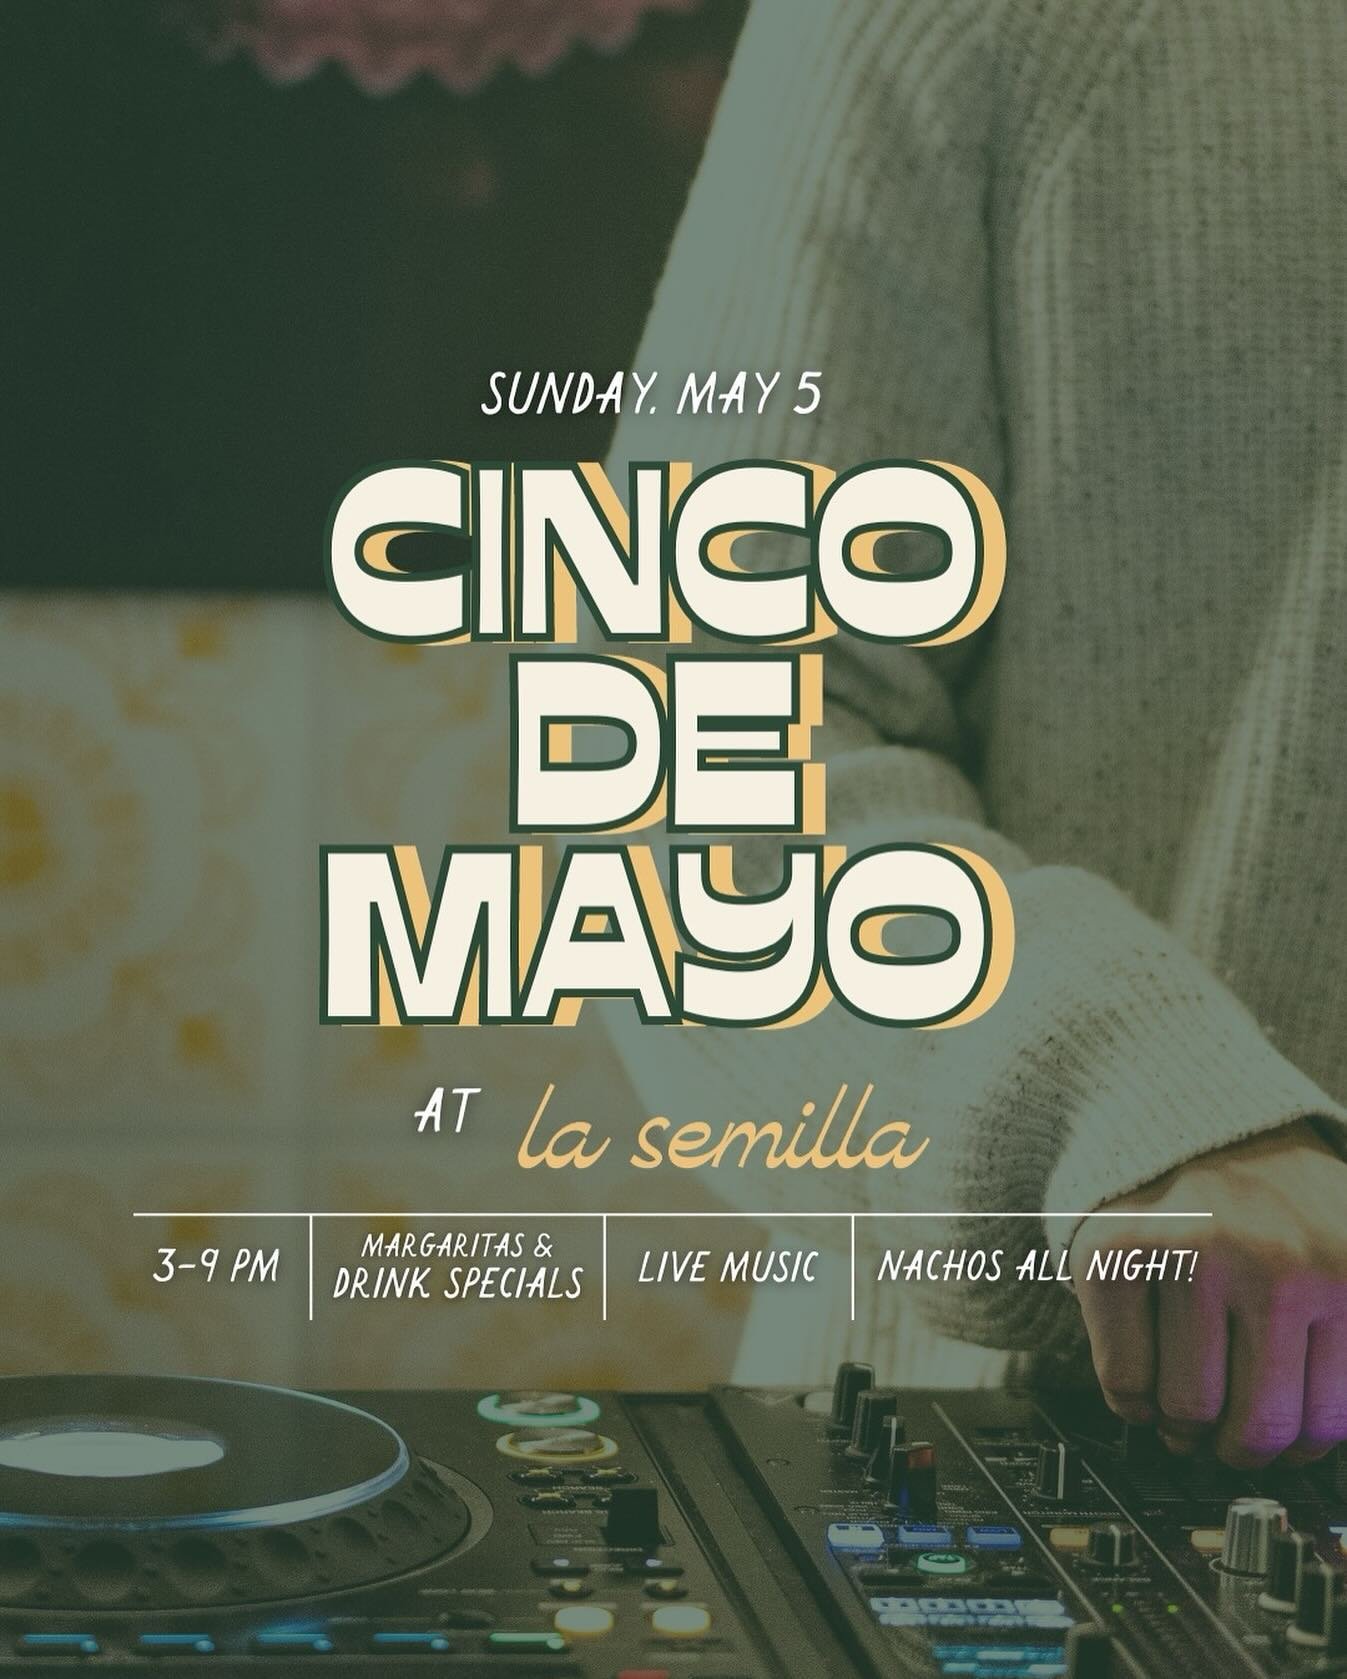 Live music, margaritas, drink specials, nachos all night! You know the vibes. We&rsquo;re opening two hours early on Cinco de Mayo! Come party with us.
⠀
🎶 DJ set with @nilesmusic
🍻 Drink specials
🔥 Nachos on a Sunday!
🎉 3pm-9pm

#lasemillaatl #s